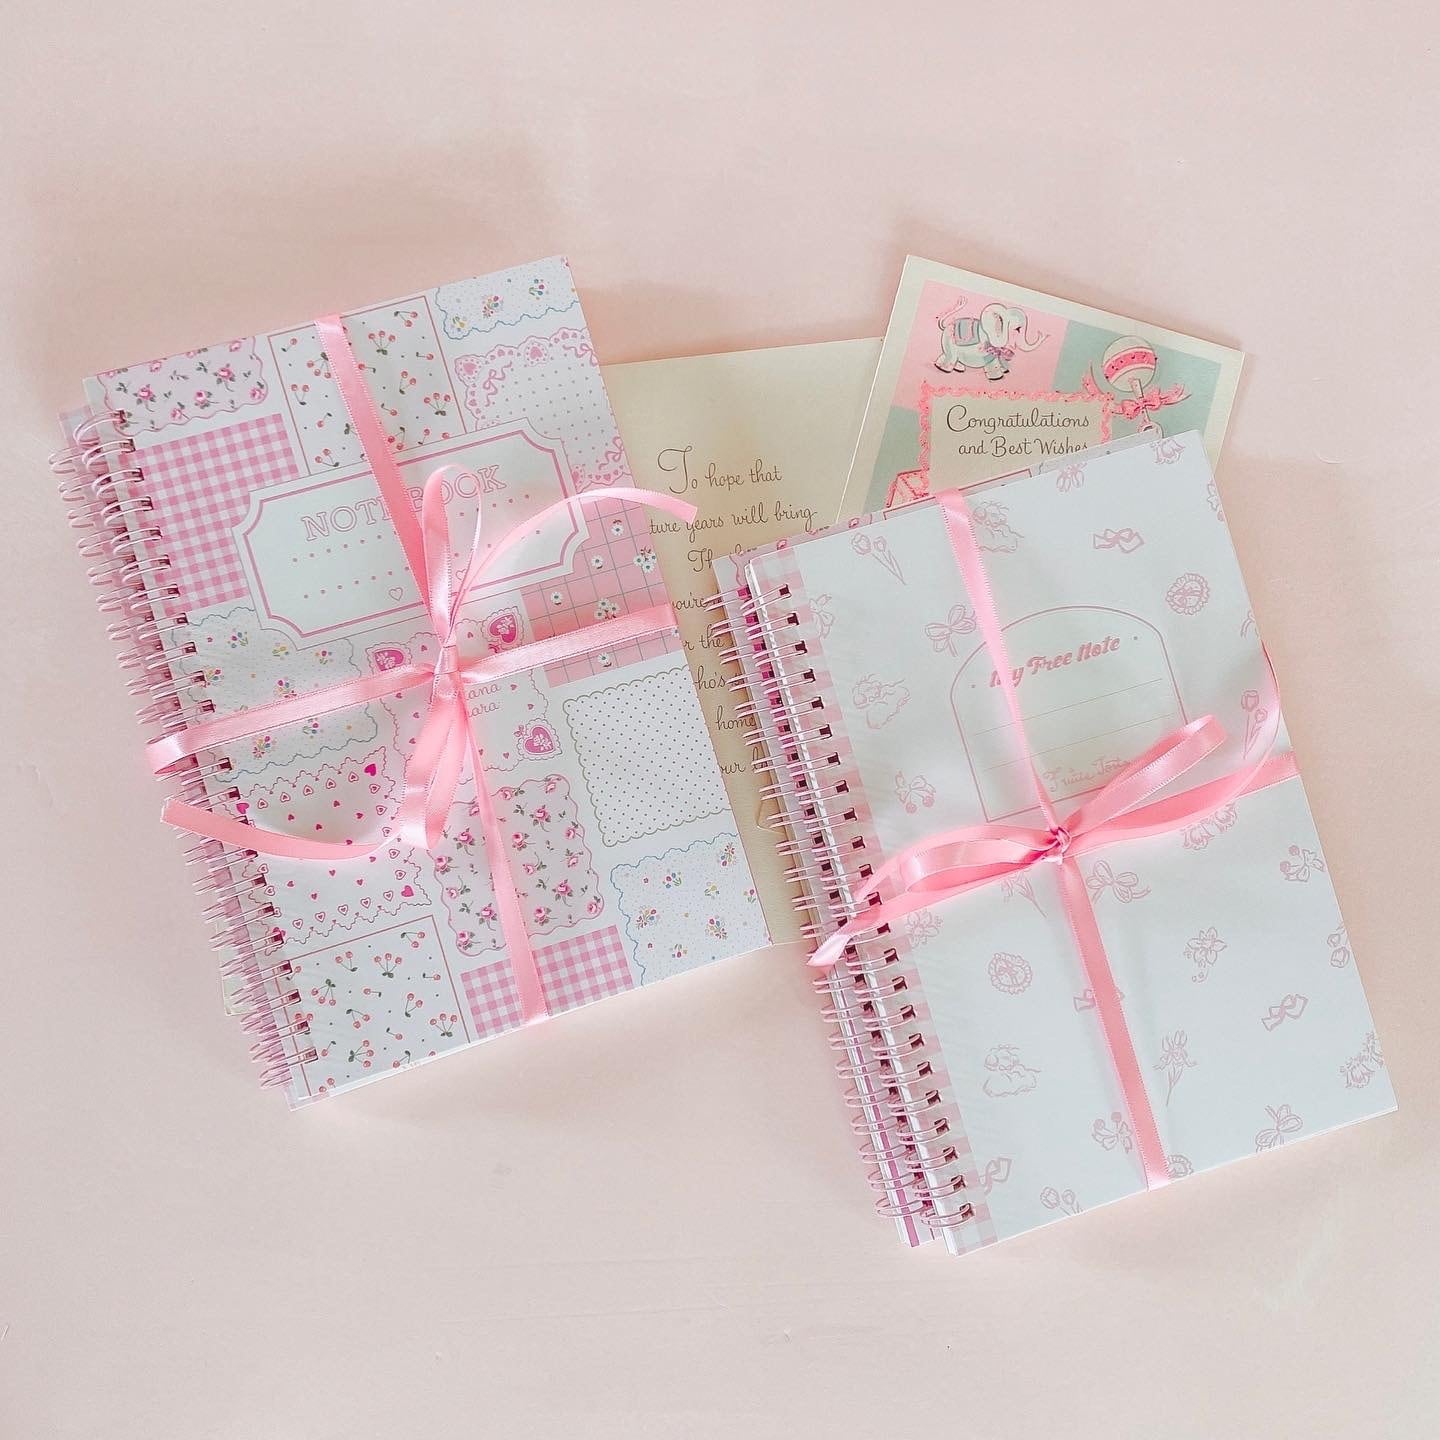 A5 in My Room pink note book ピンク方眼ノートブック